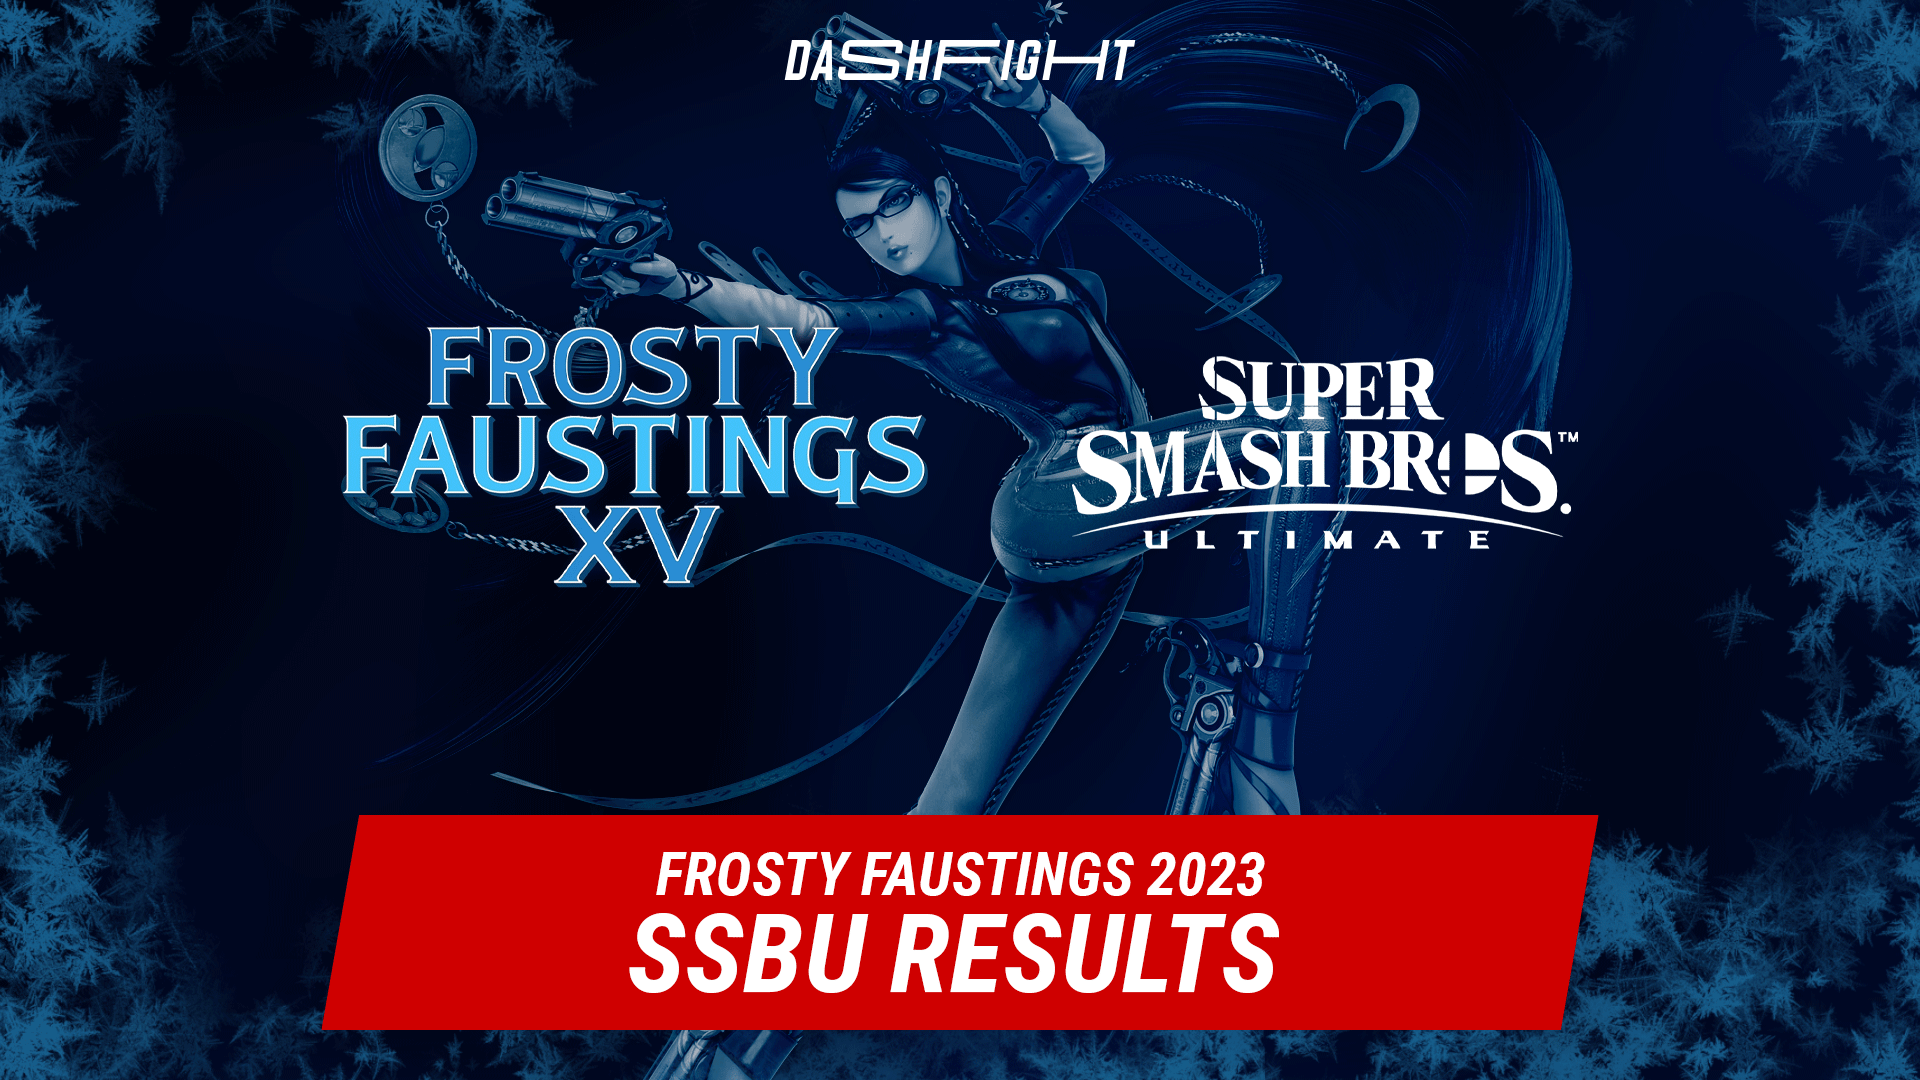 SSBU at Frosty Faustings XV 2023: ApolloKage Nearly Snubs over Riddles